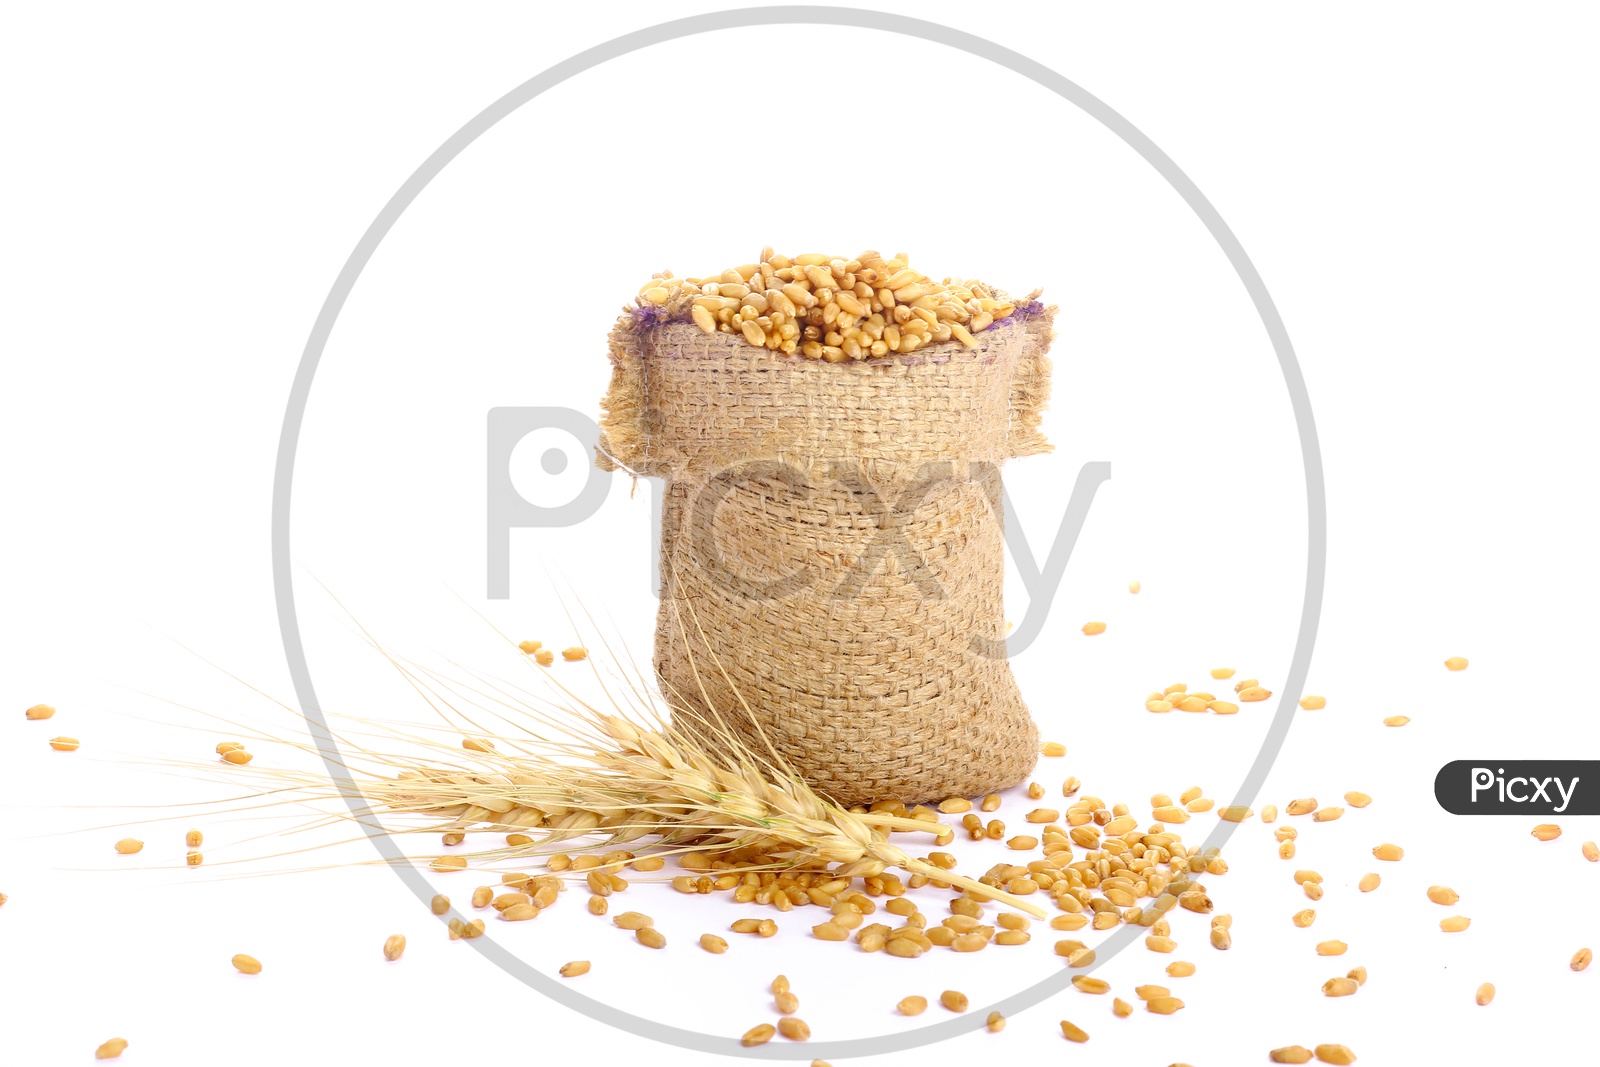 Raw Triticum in Sackbag with a white Background / Wheat Grains in Sackbags